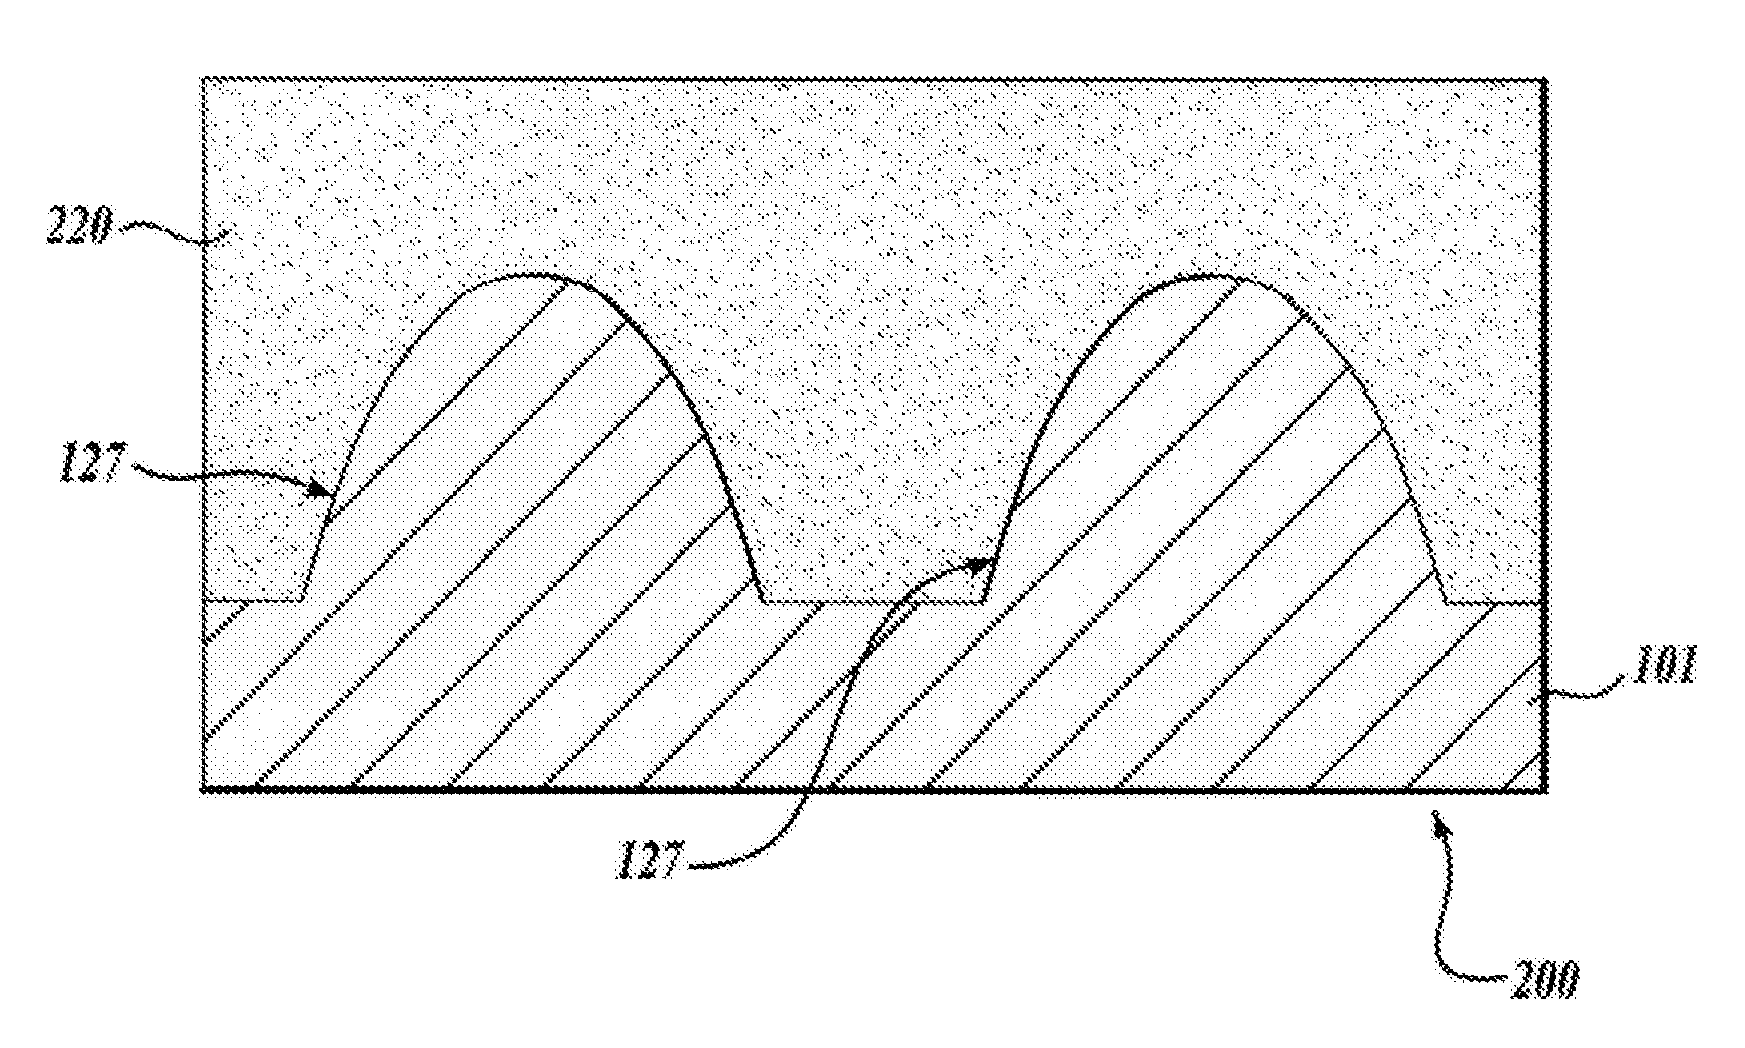 Micro-optic elements and method for making the same